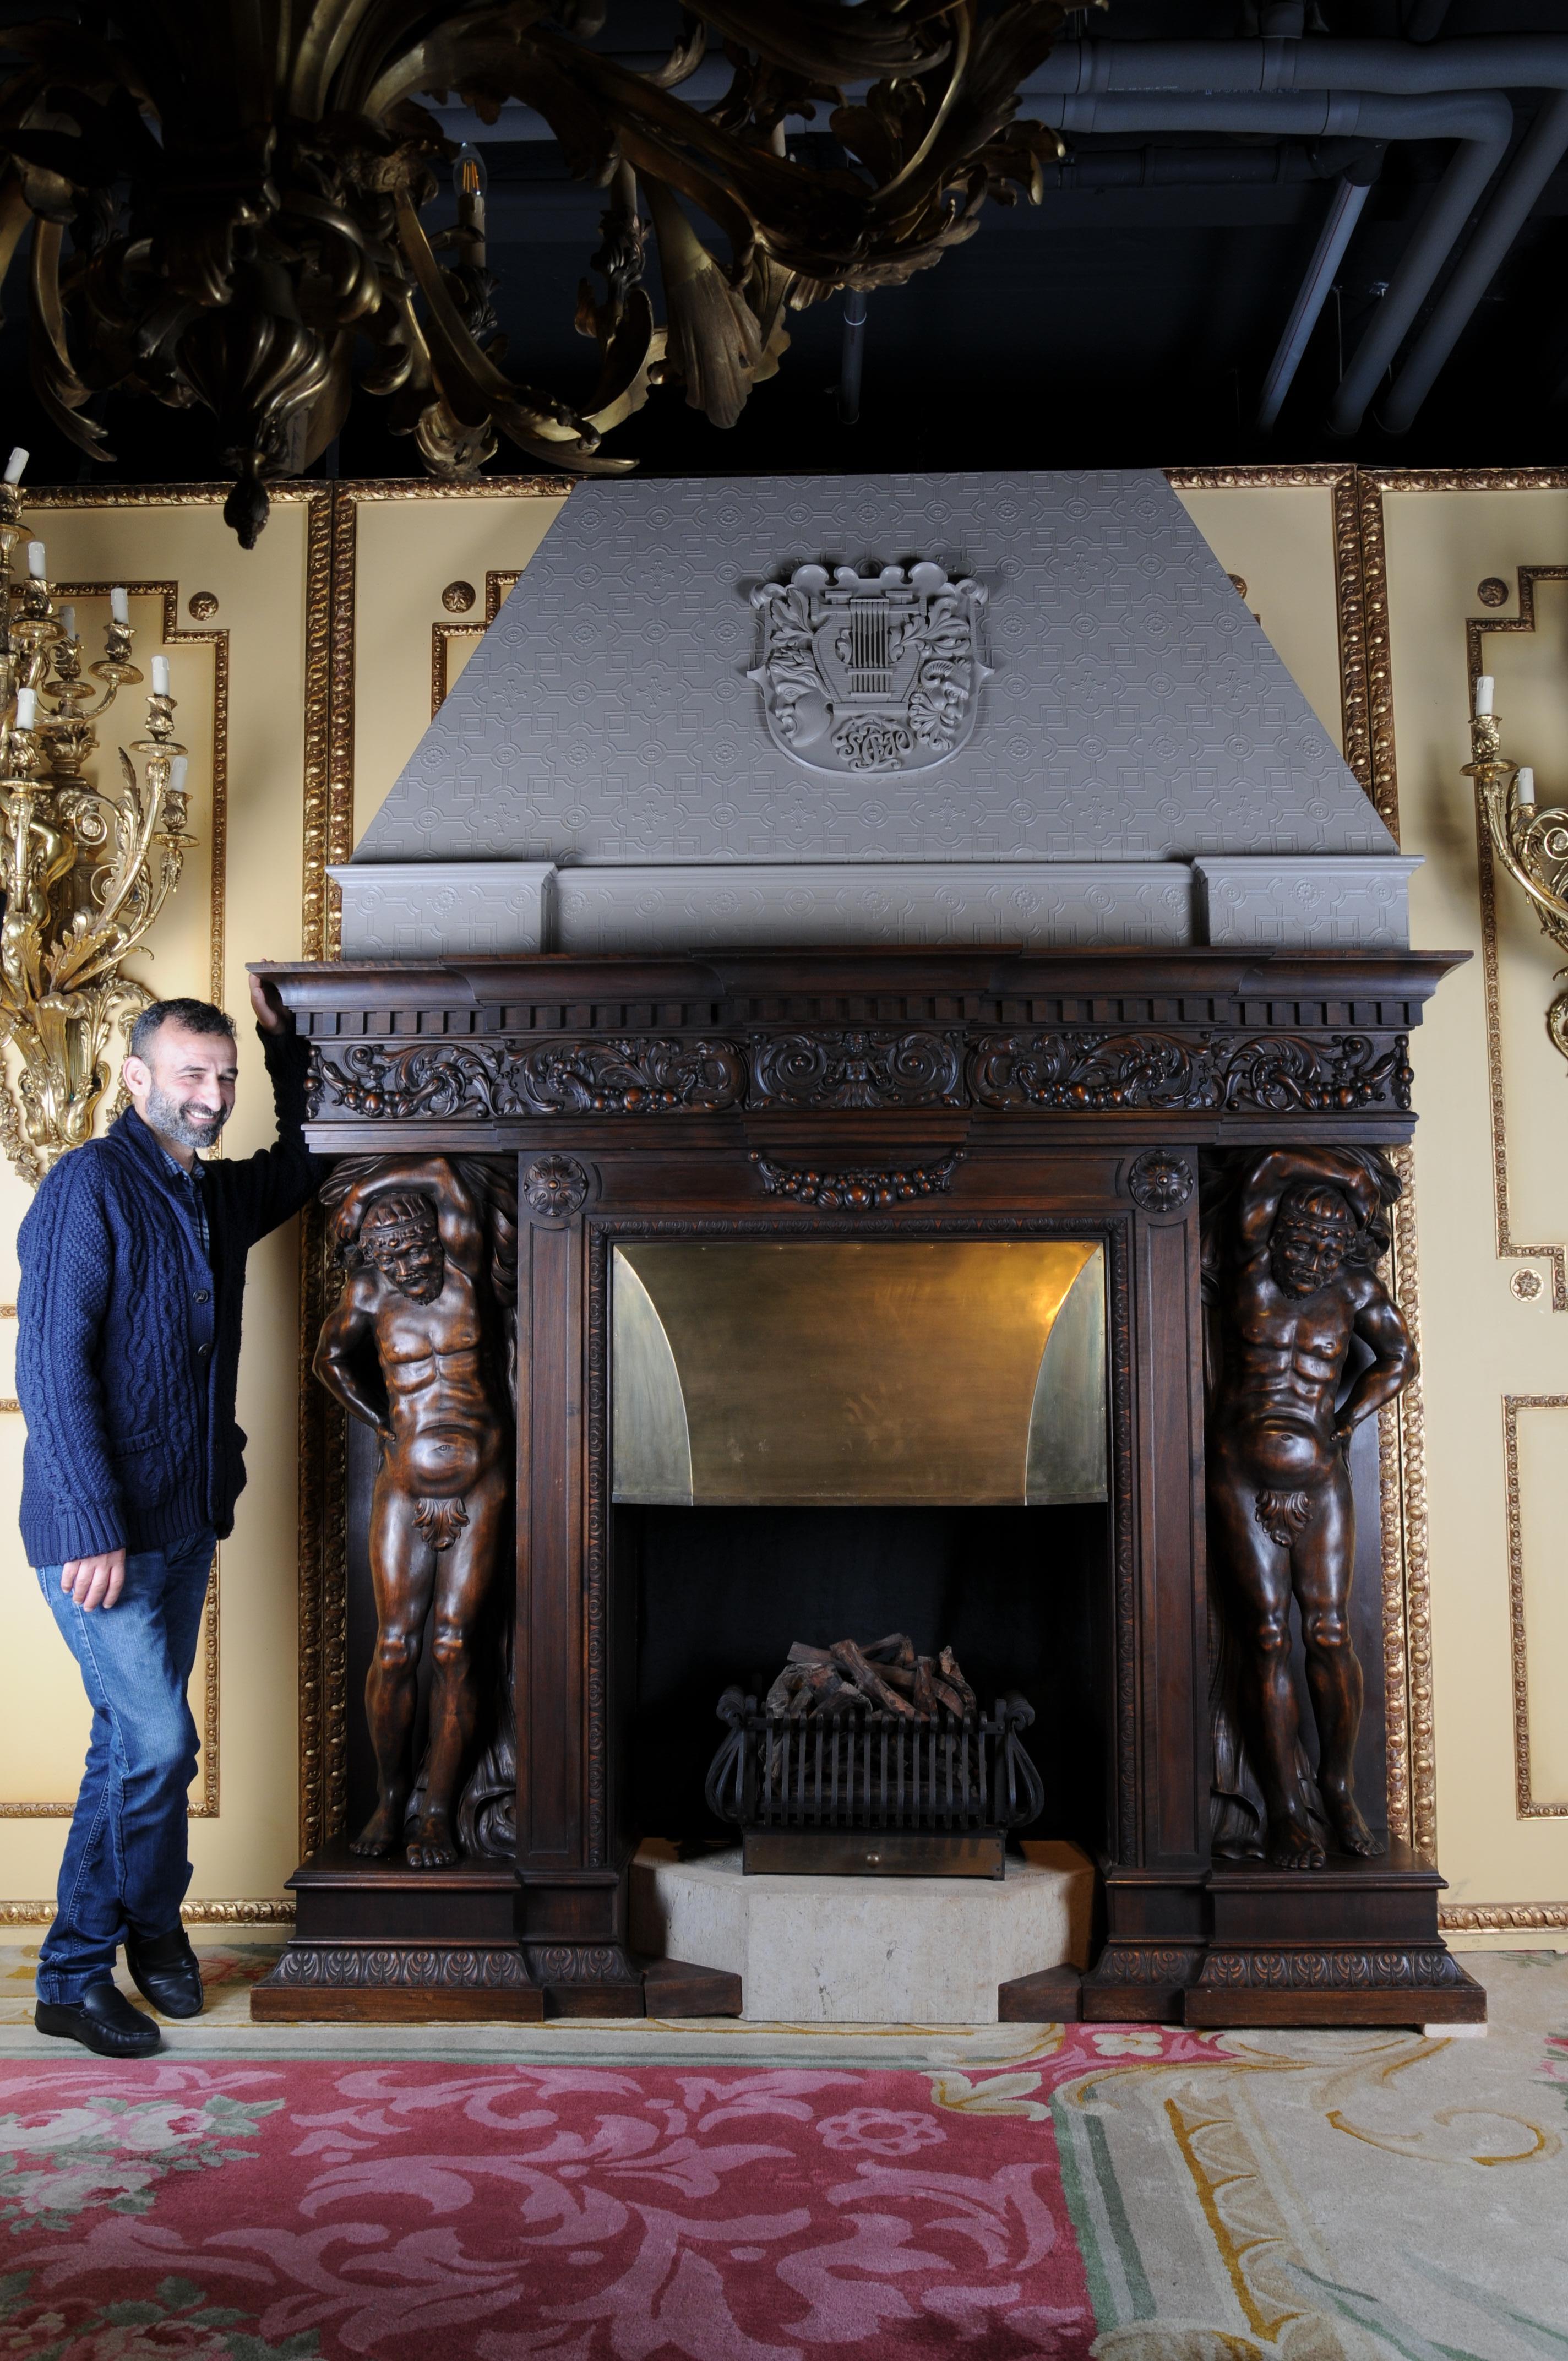 Monumental figures fireplace Neo-Renaissance 19th century walnut -hight 111 inch.

Solid walnut body flanked by a fully plastic male figures / atlases in the finest carving. Finely carved cornice with classical ornaments, a hanging garland in the